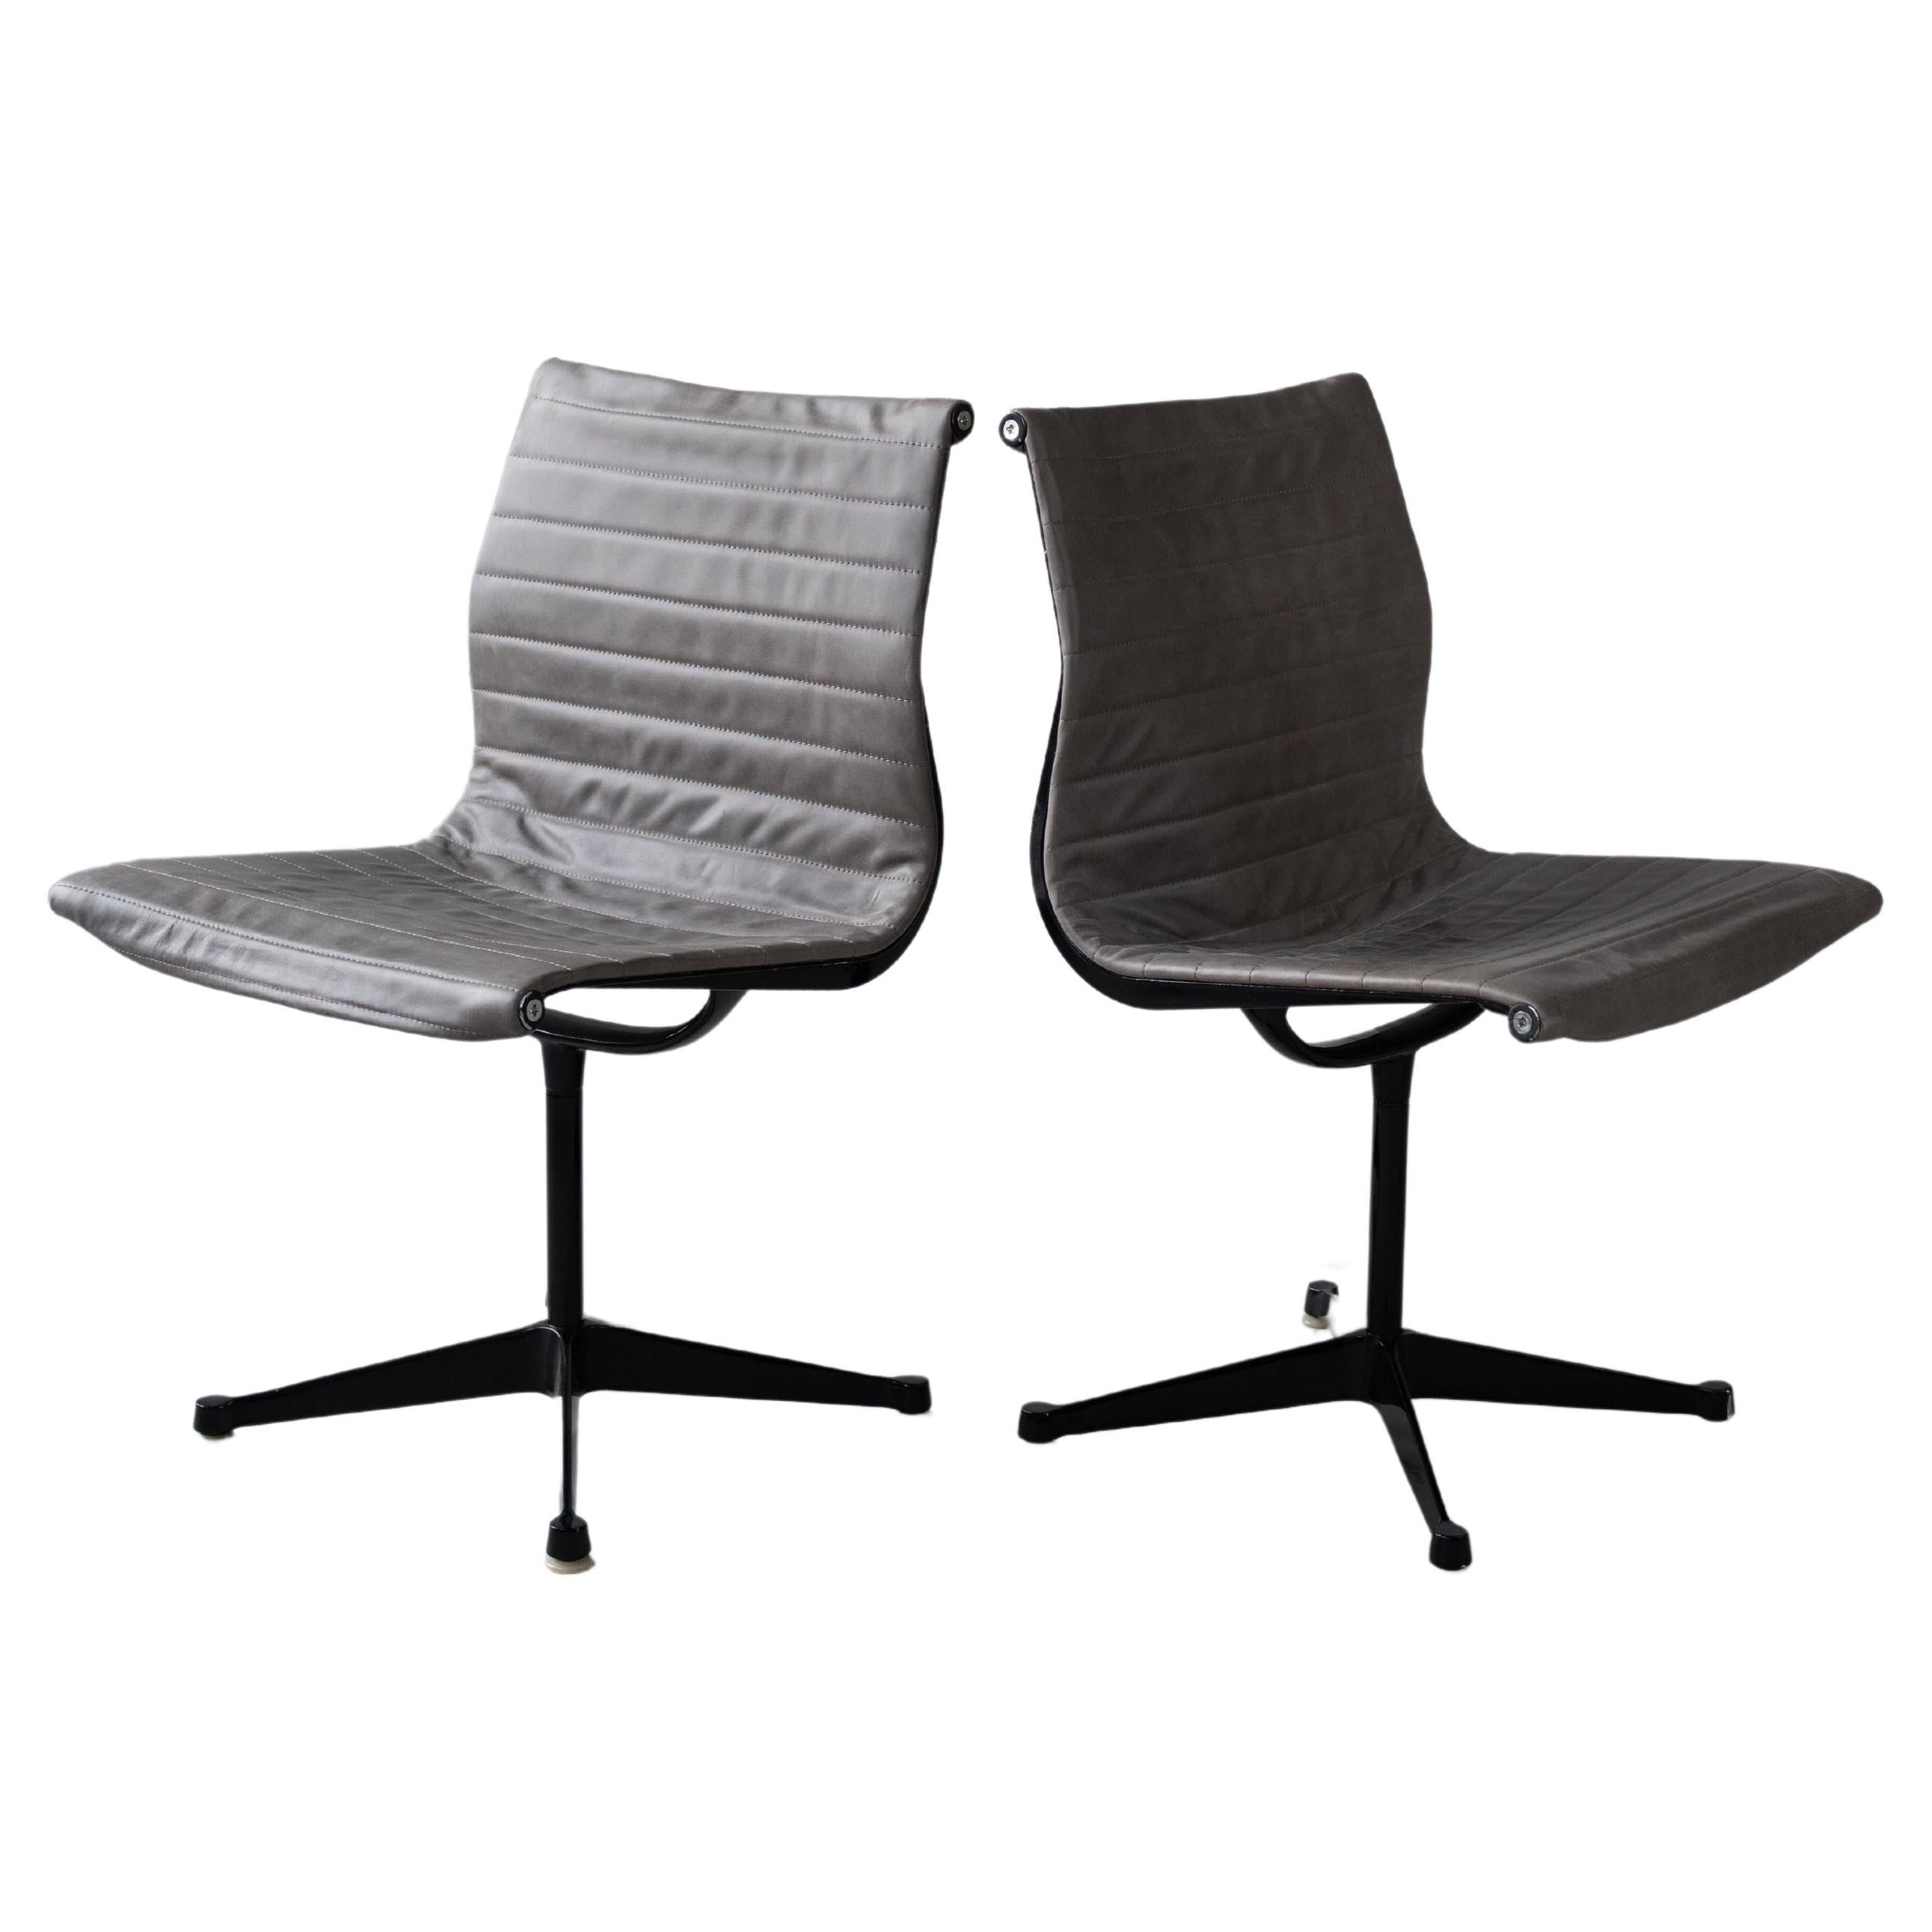 Aluminium chair by Charles and Ray Eames, set of 2 chairs